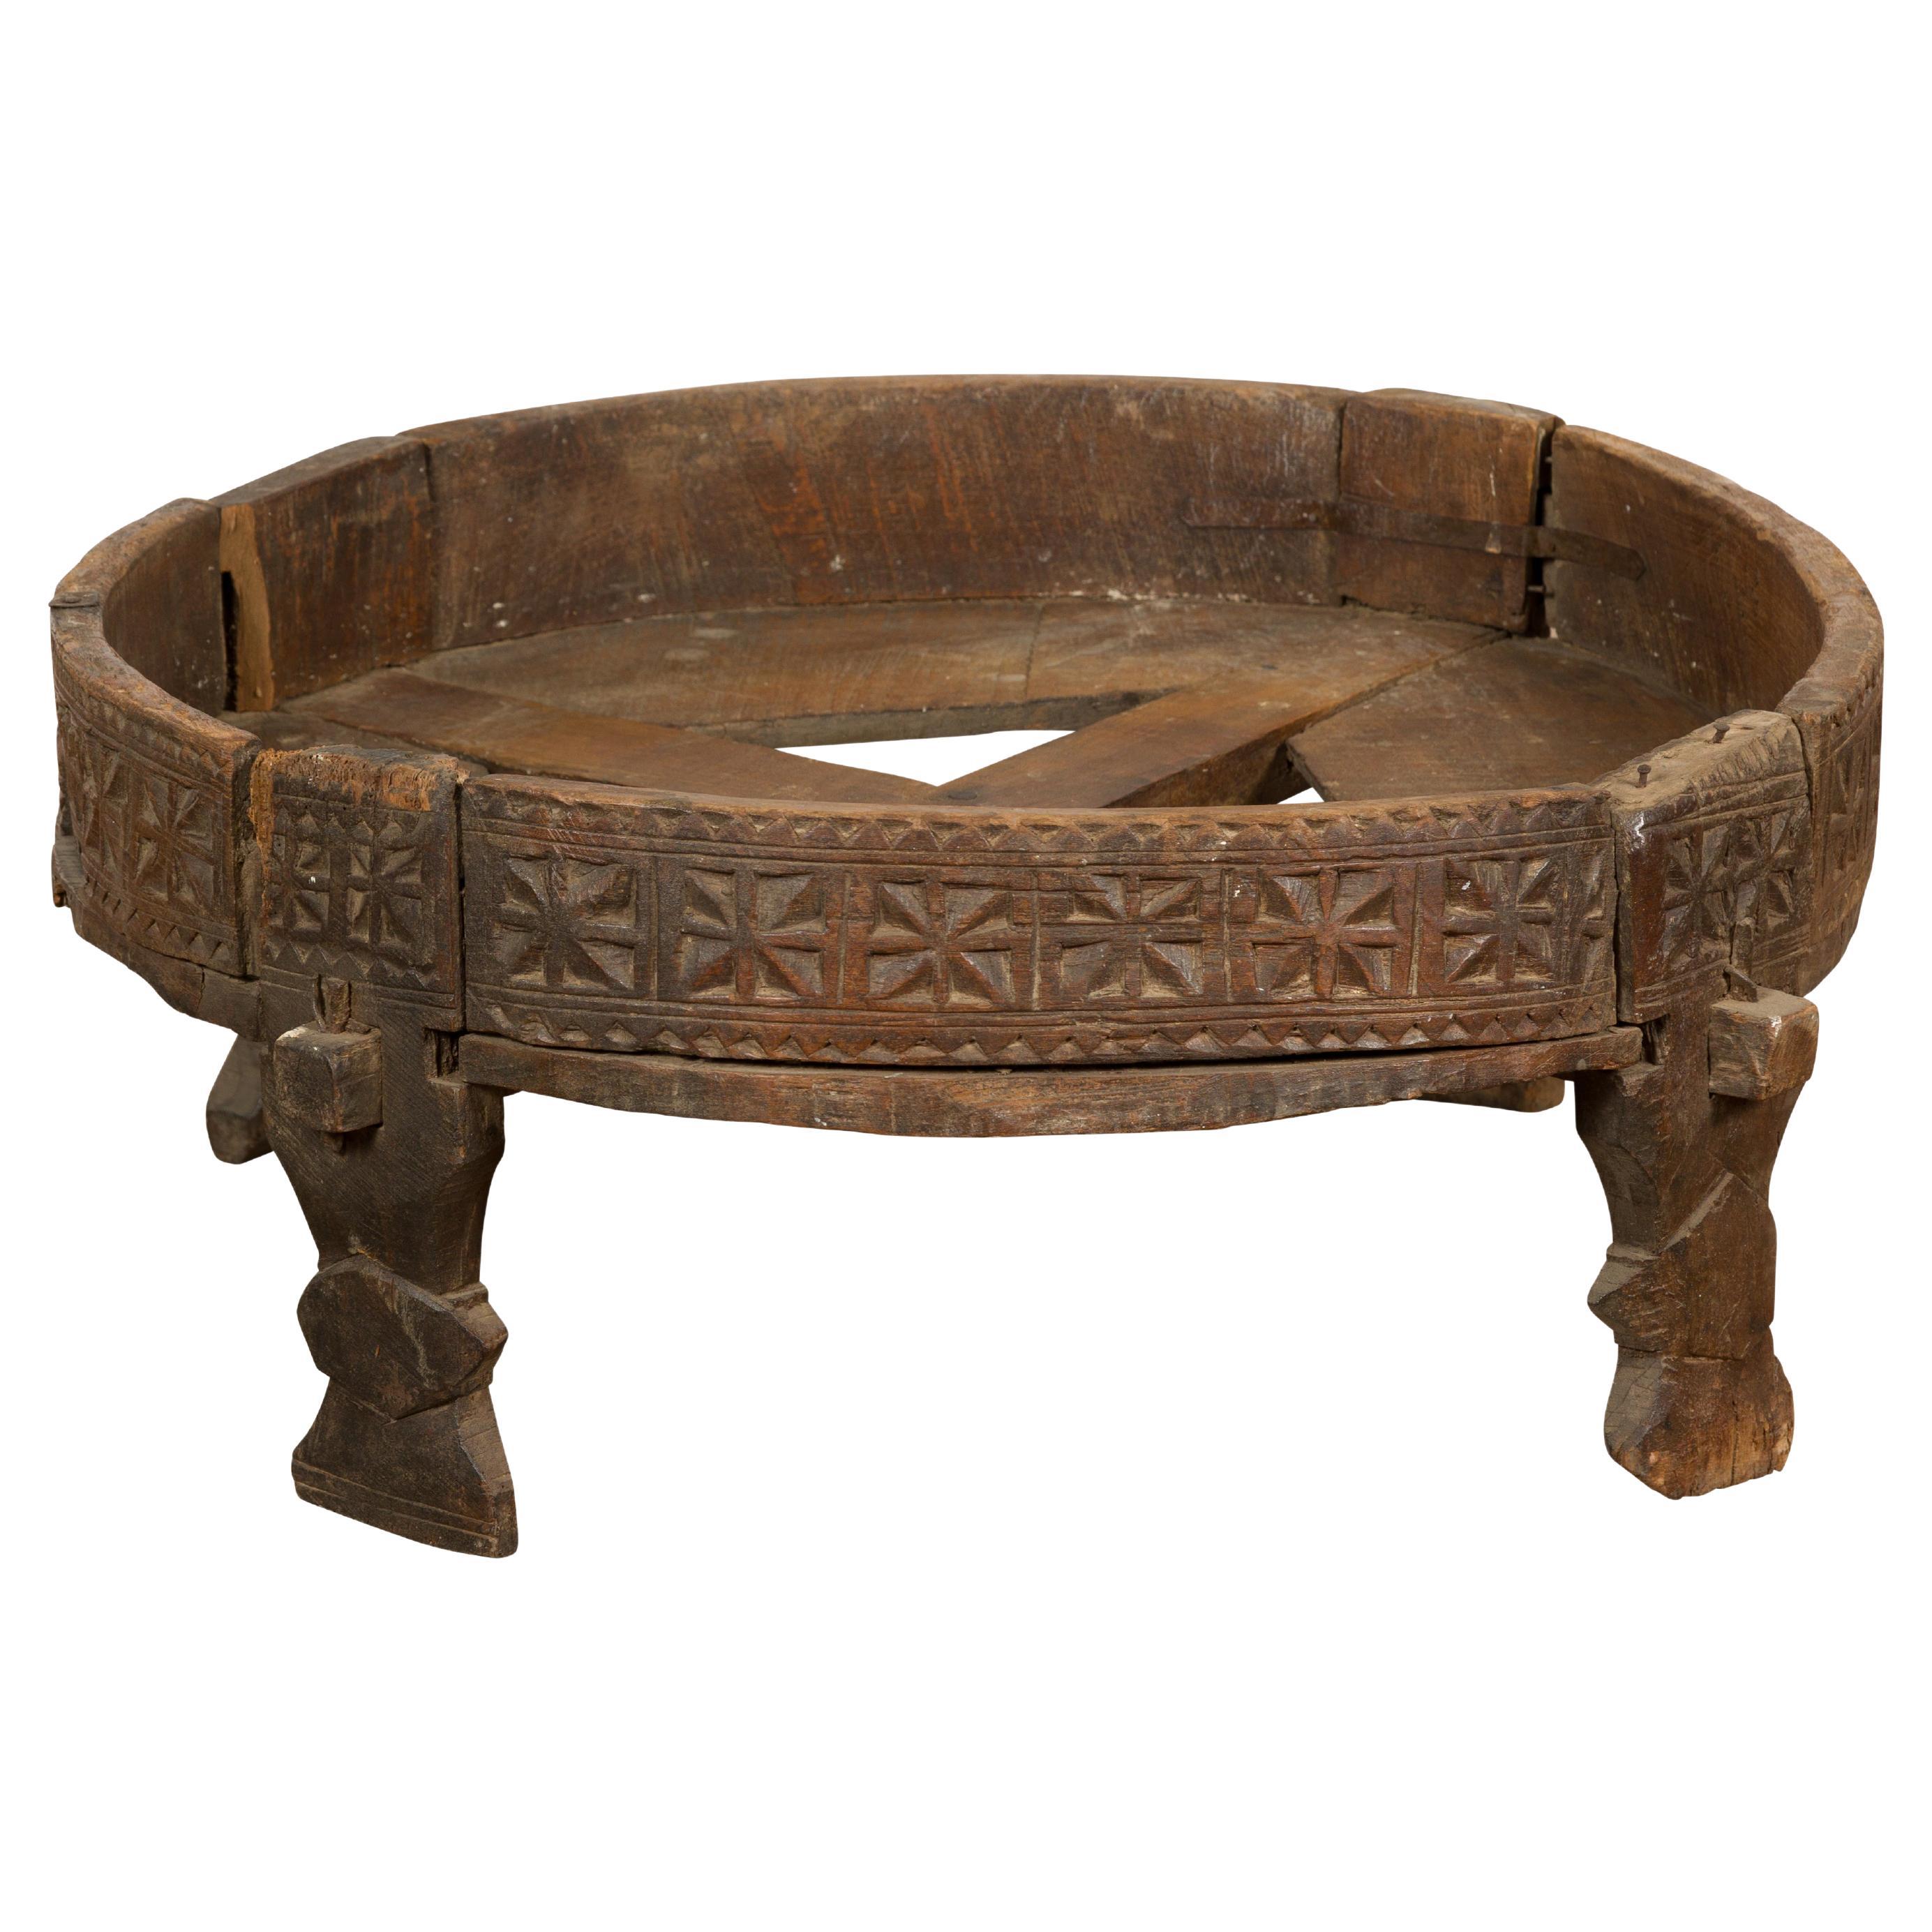 Antique Indian Chakki Grinding Table with Hand-Carved Geometric Décor For Sale